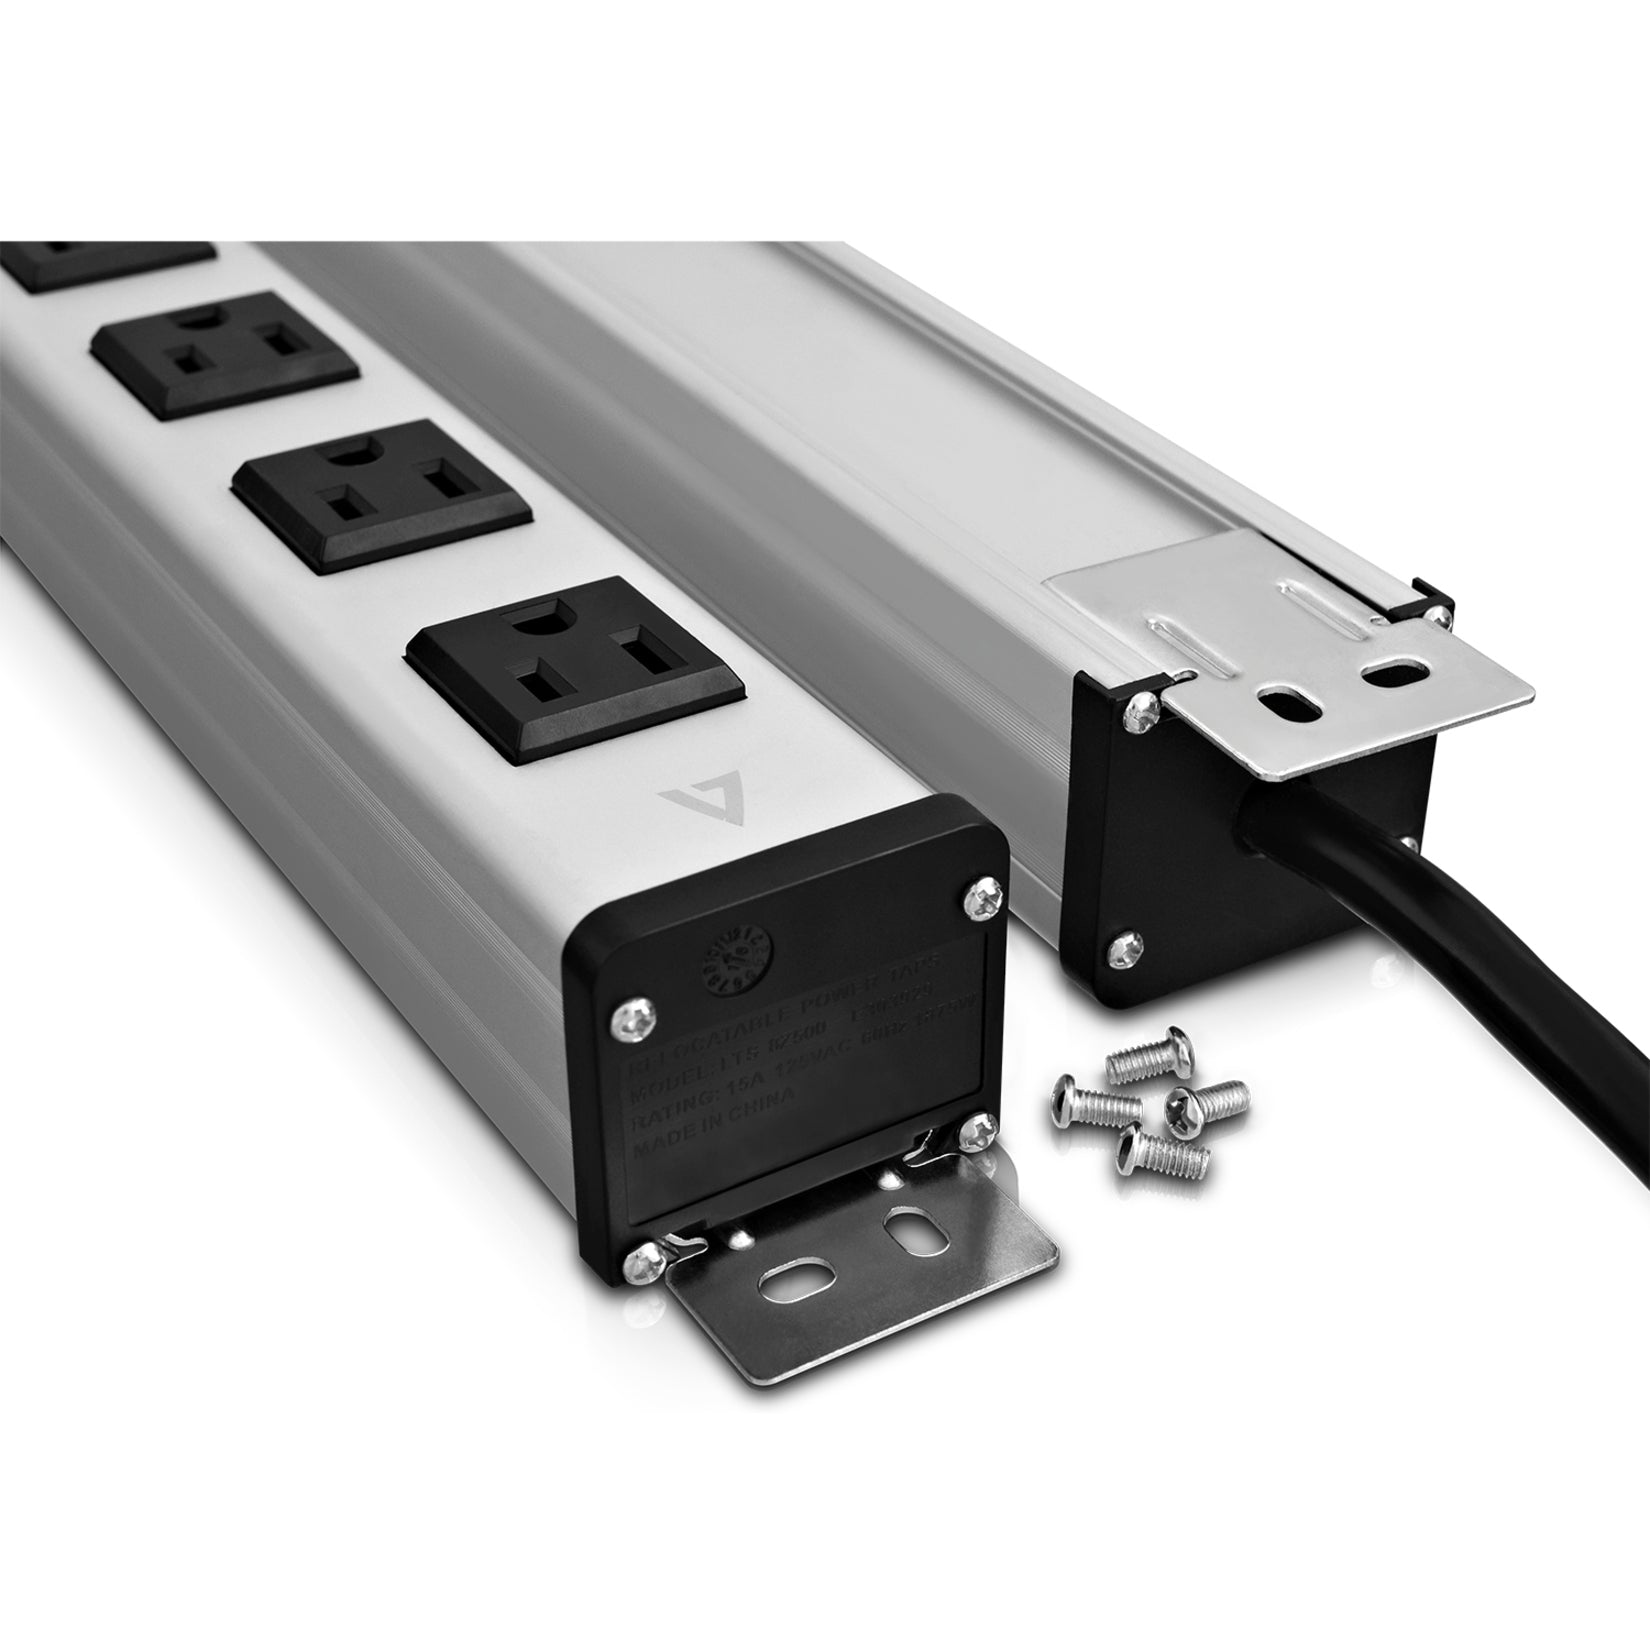 V7 PWS3312-1N 12-Outlet Horizontal Industrial Metal Power Strip 125V, 15A, 15-ft Cord, 5-15R